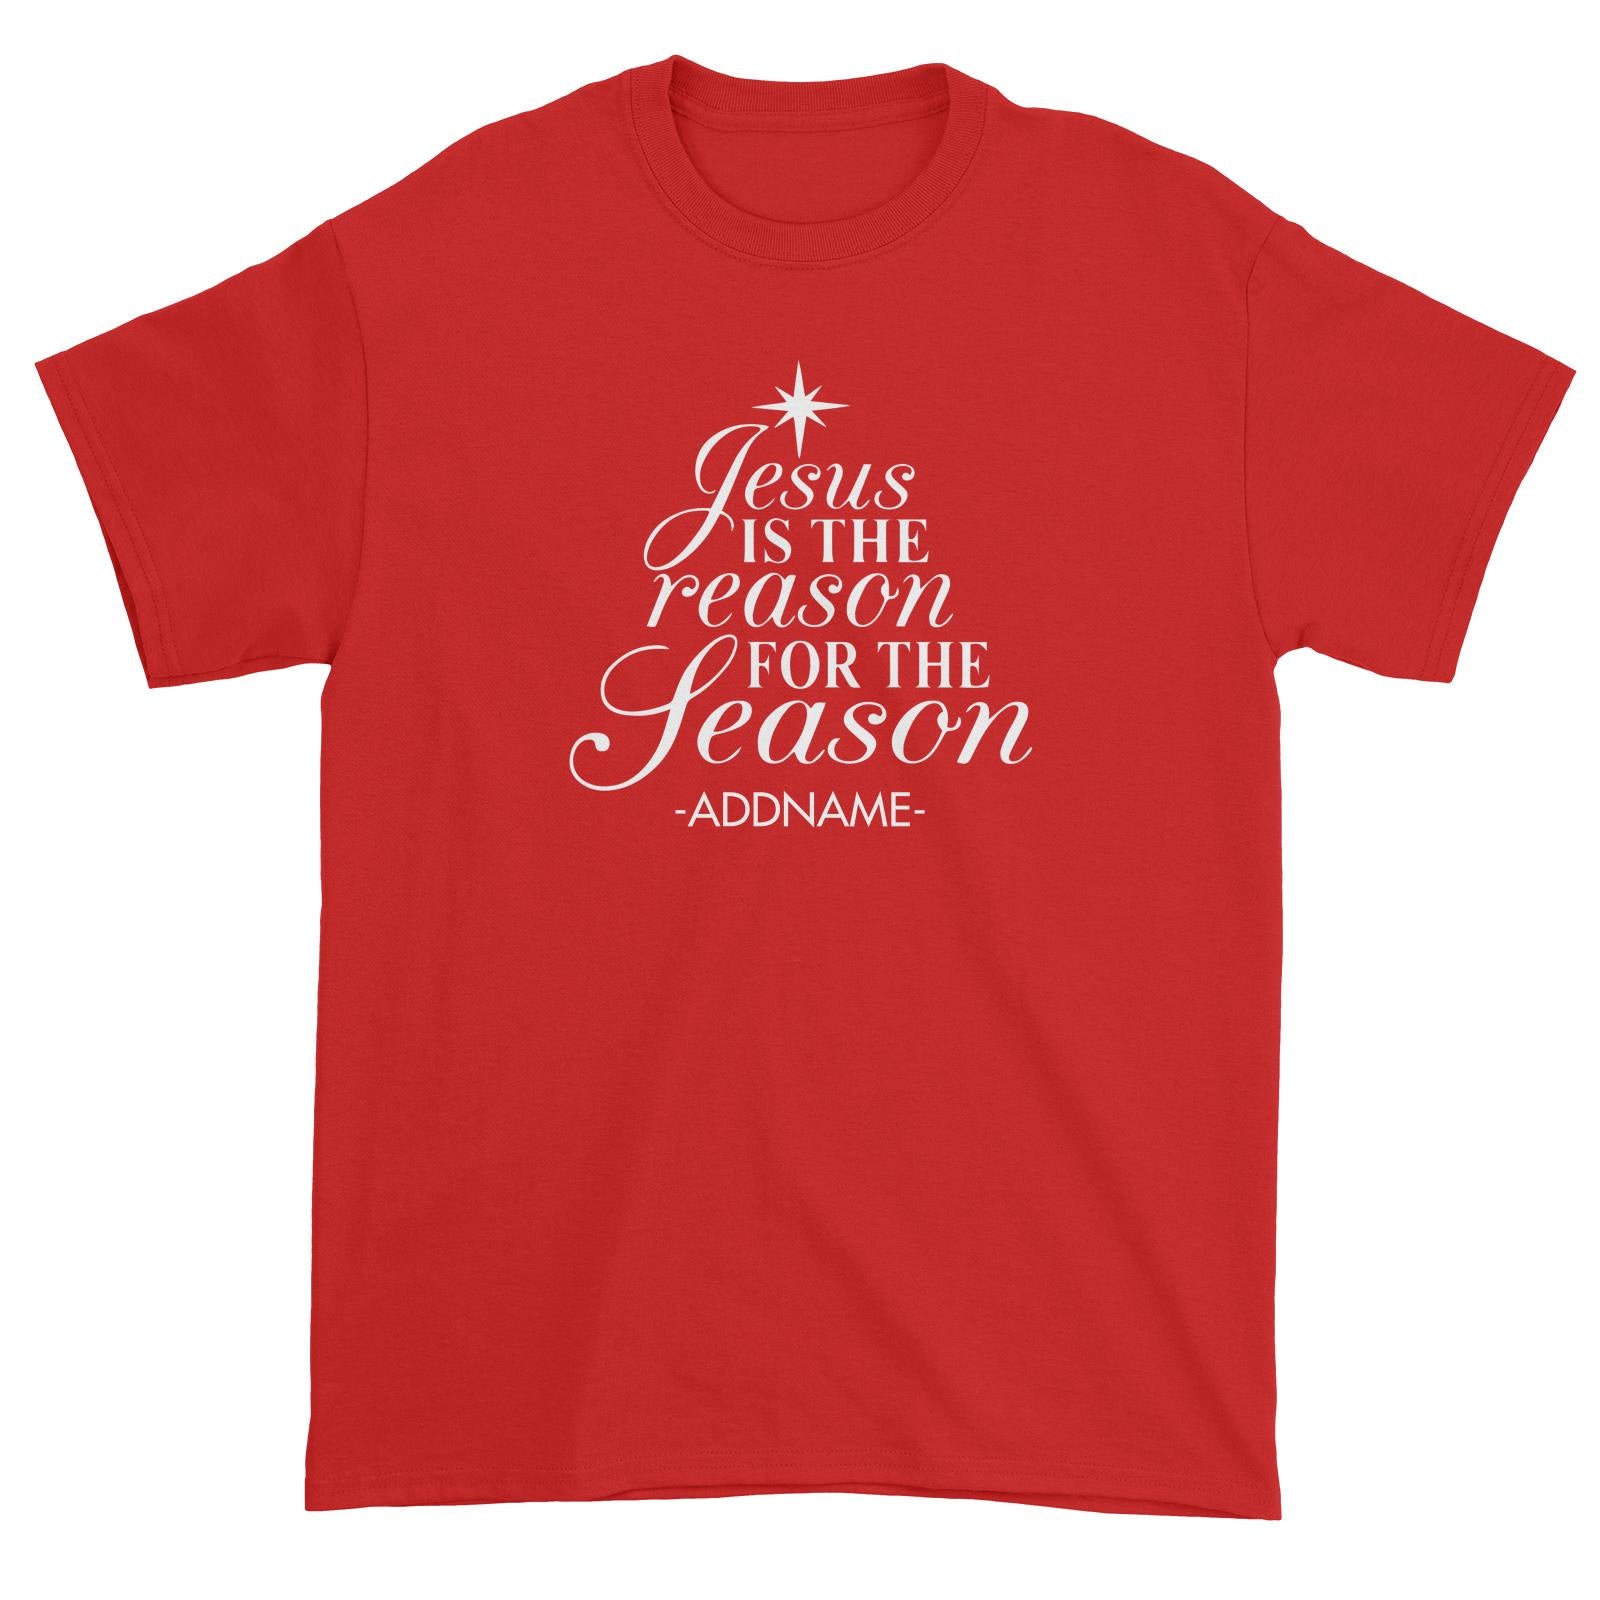 Jesus Is The Reason For The Season Addname Unisex T-Shirt Christmas Personalizable Designs Lettering